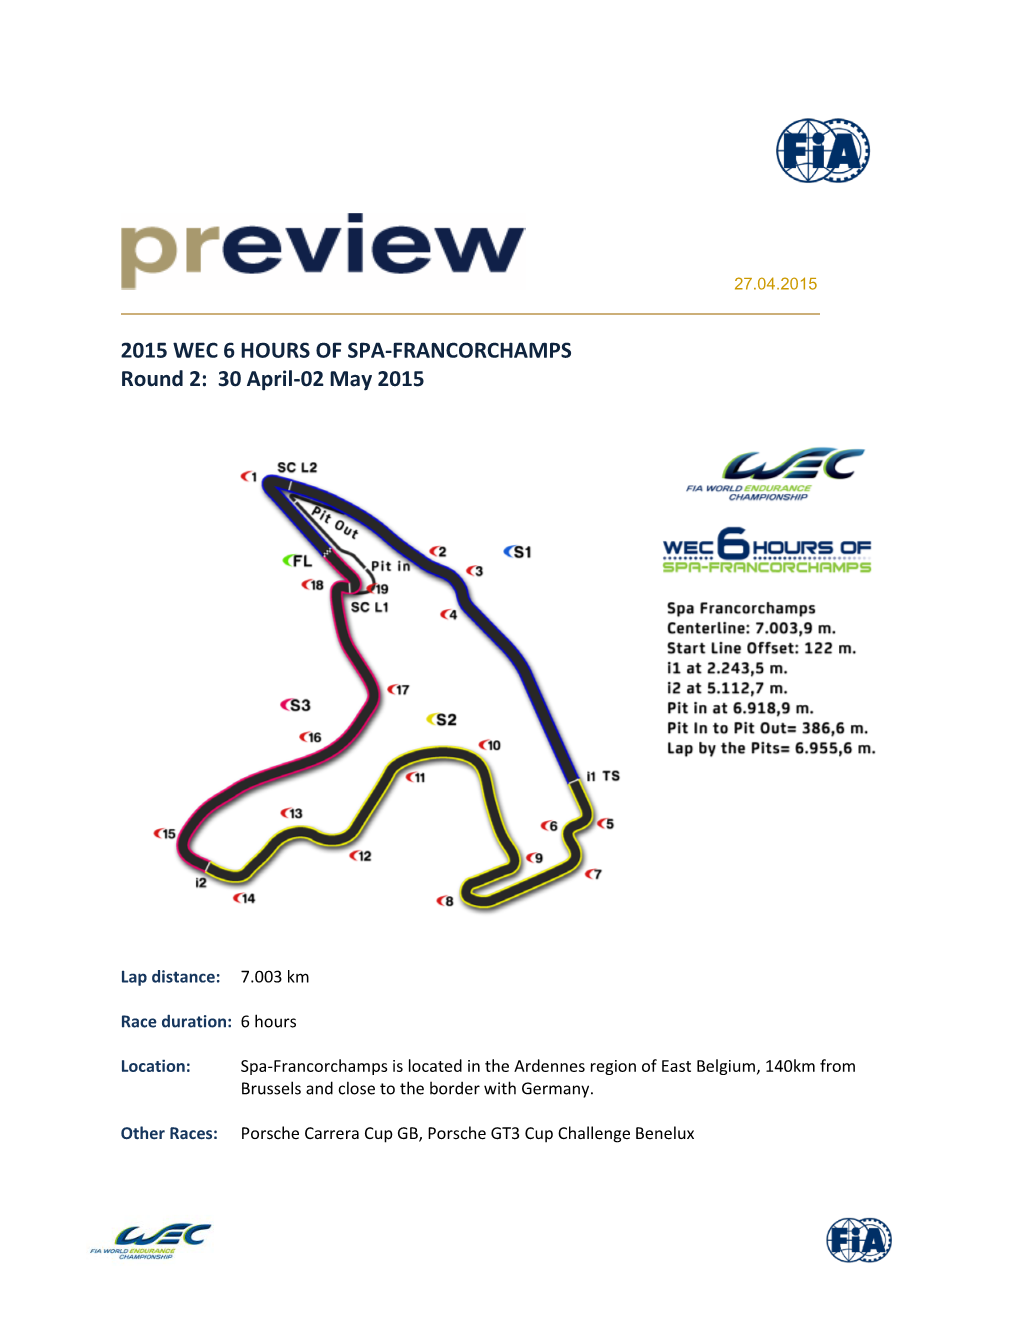 2015 WEC 6 HOURS of SPA-FRANCORCHAMPS Round 2: 30 April-02 May 2015